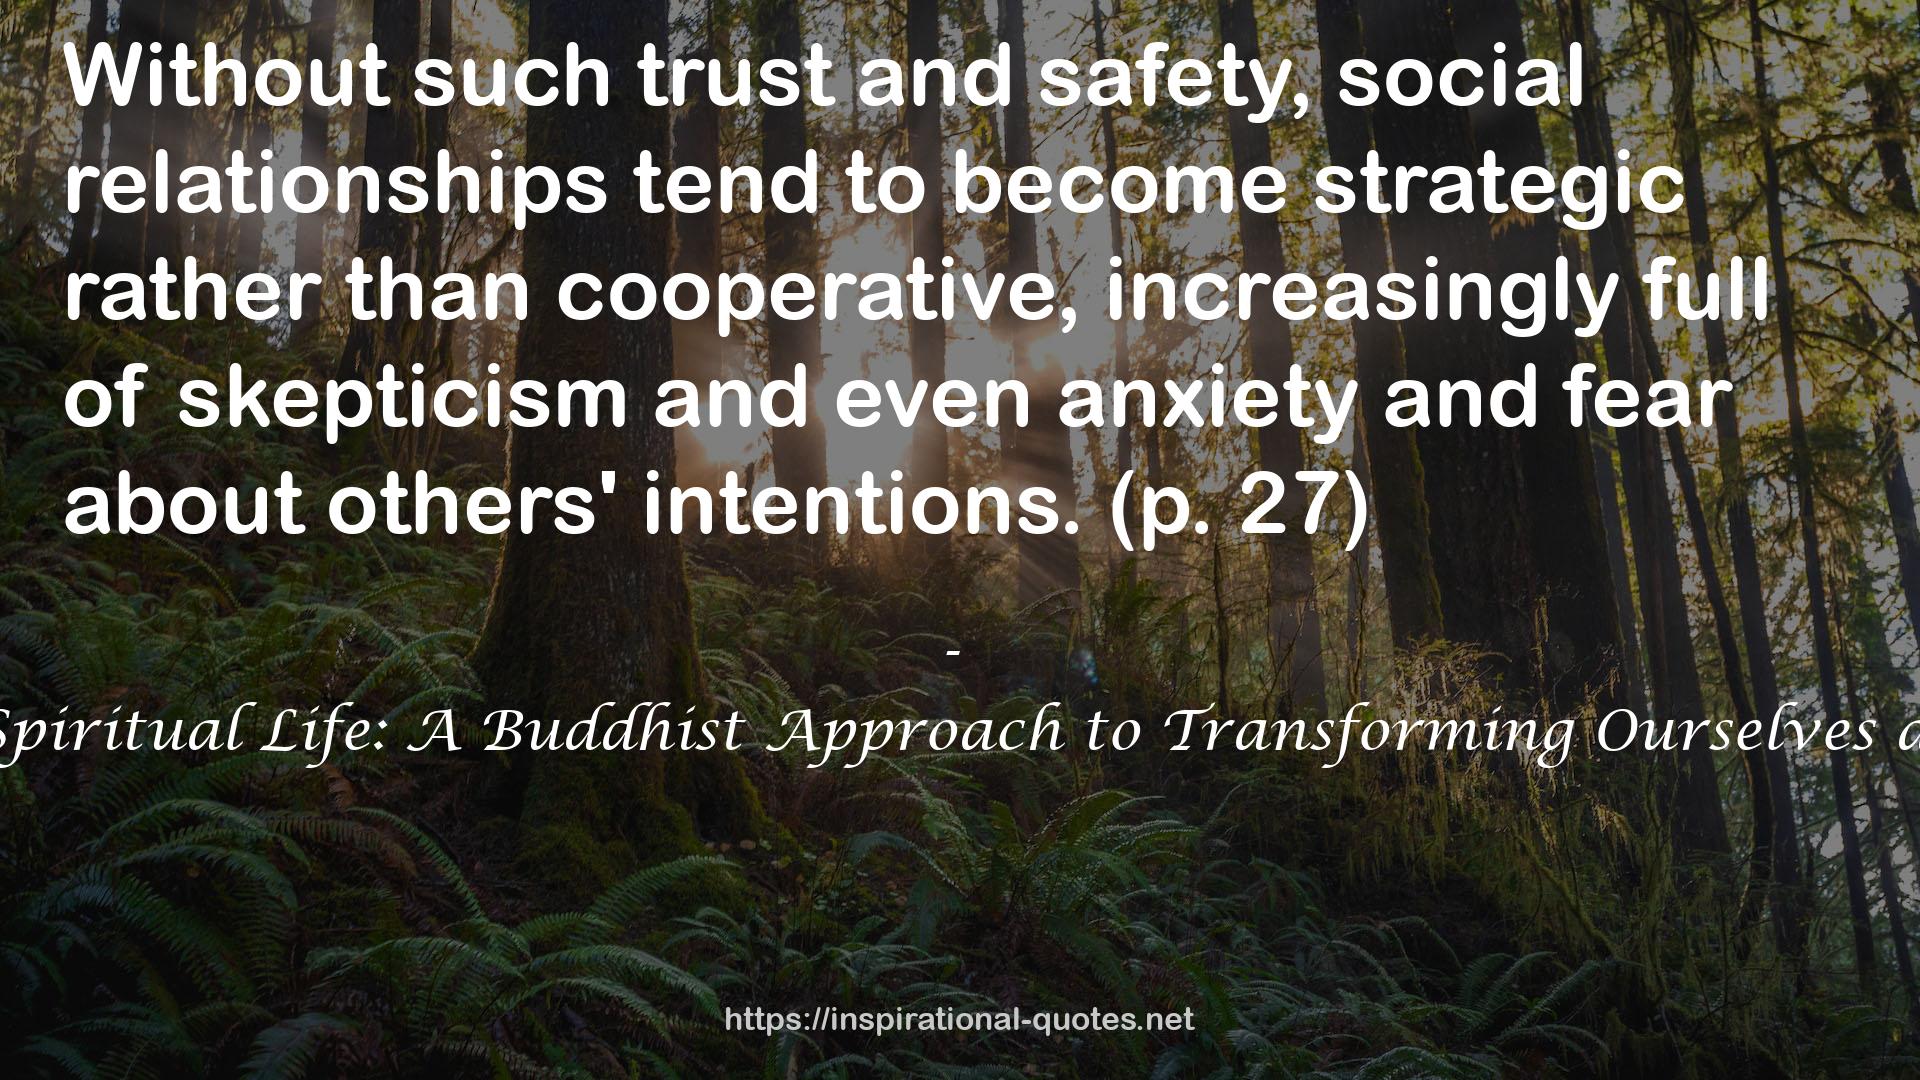 The Engaged Spiritual Life: A Buddhist Approach to Transforming Ourselves and the World QUOTES